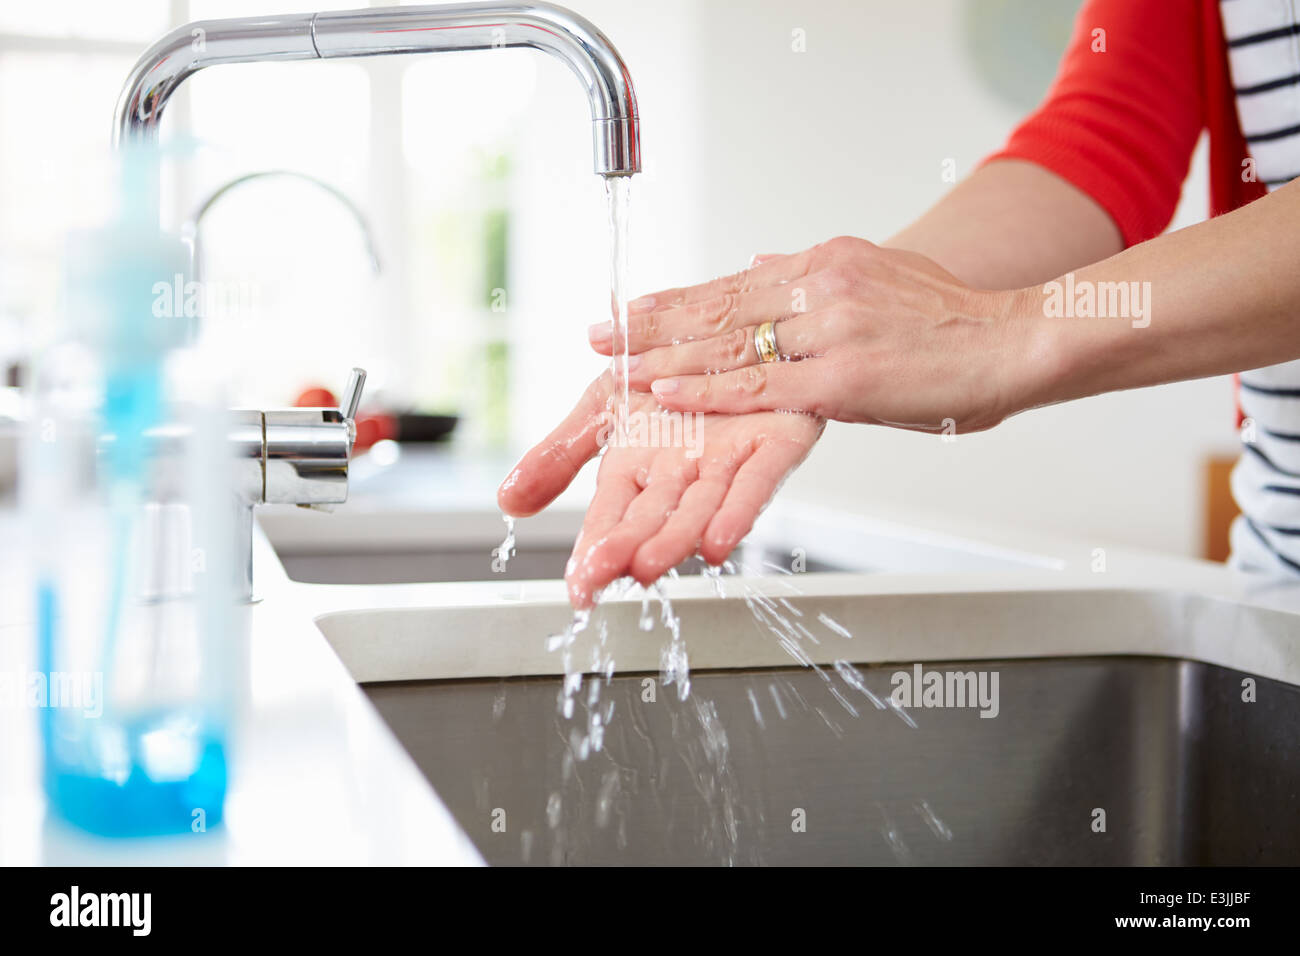 Close Up Of Woman Washing Hands In Kitchen Sink Stock Photo